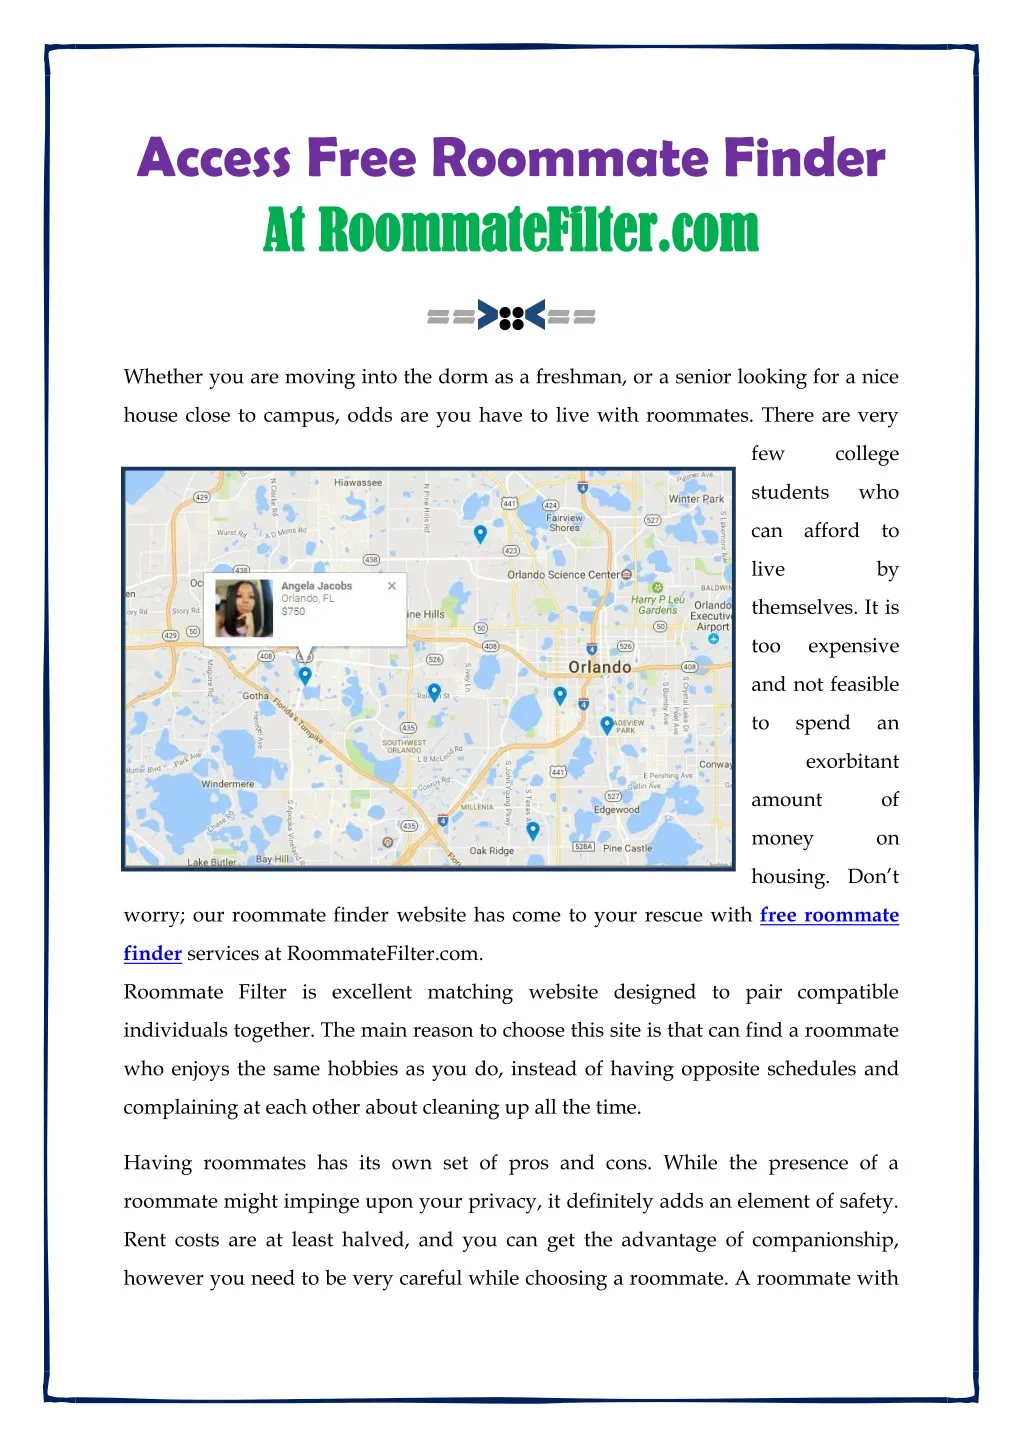 access free roommate finder at at roommatefilter